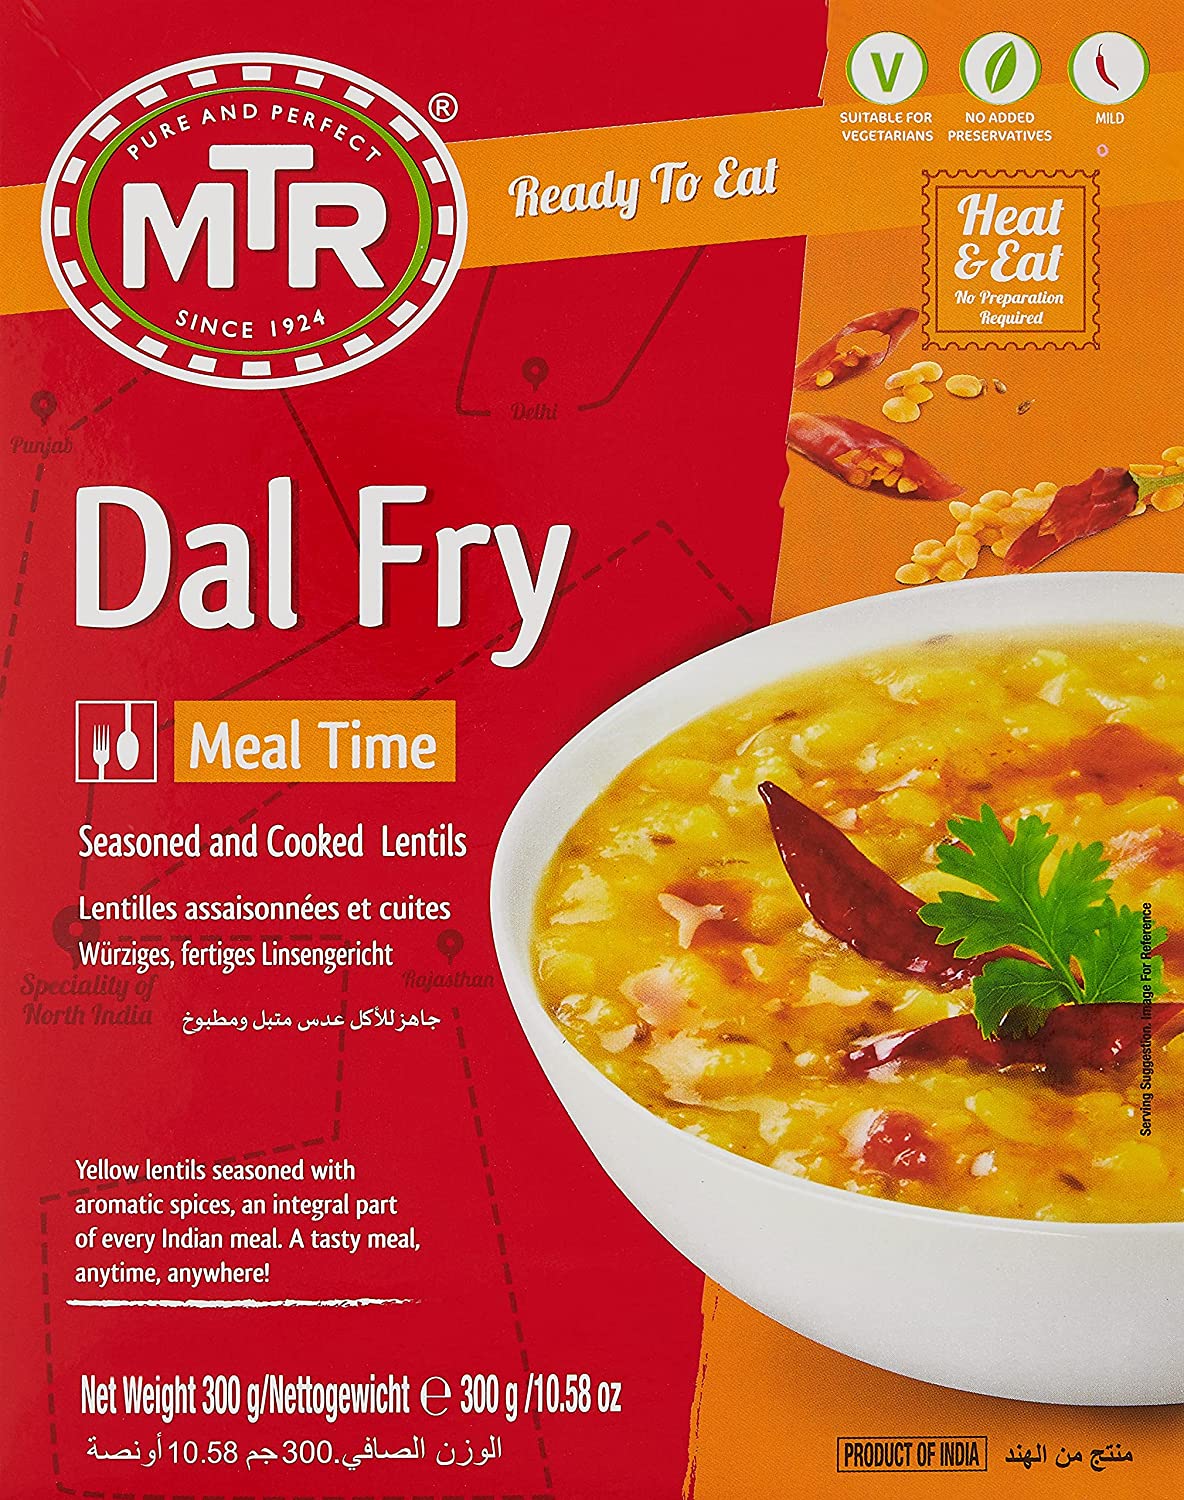 MTR Ready To Eat Dal Fry Image